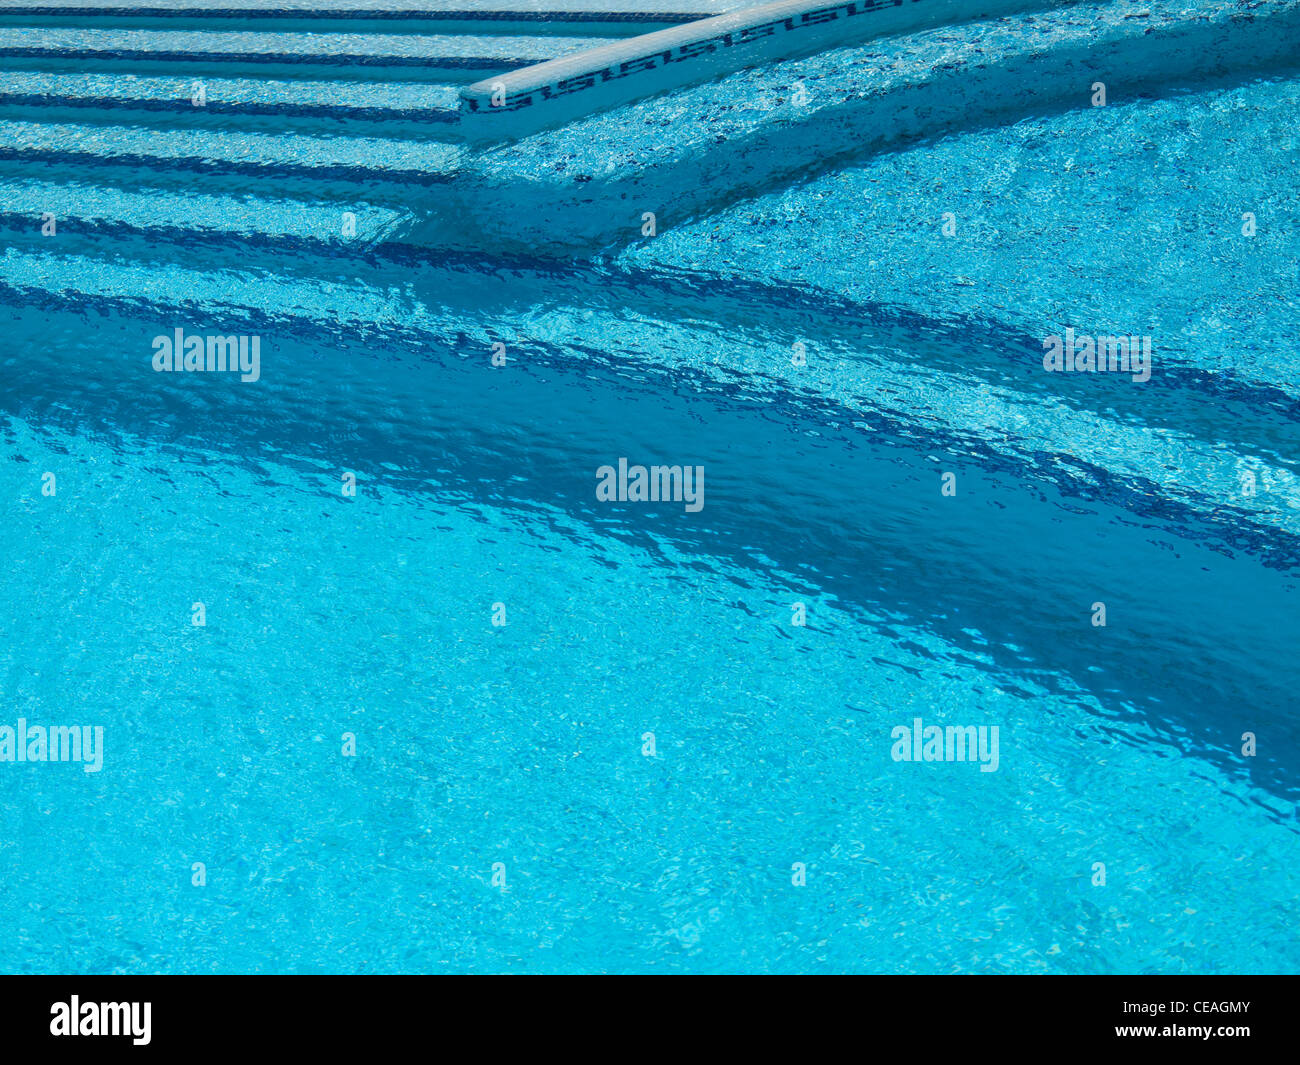 Turquoise swimming pool with steps, dark blue trim and rippling water. Stock Photo